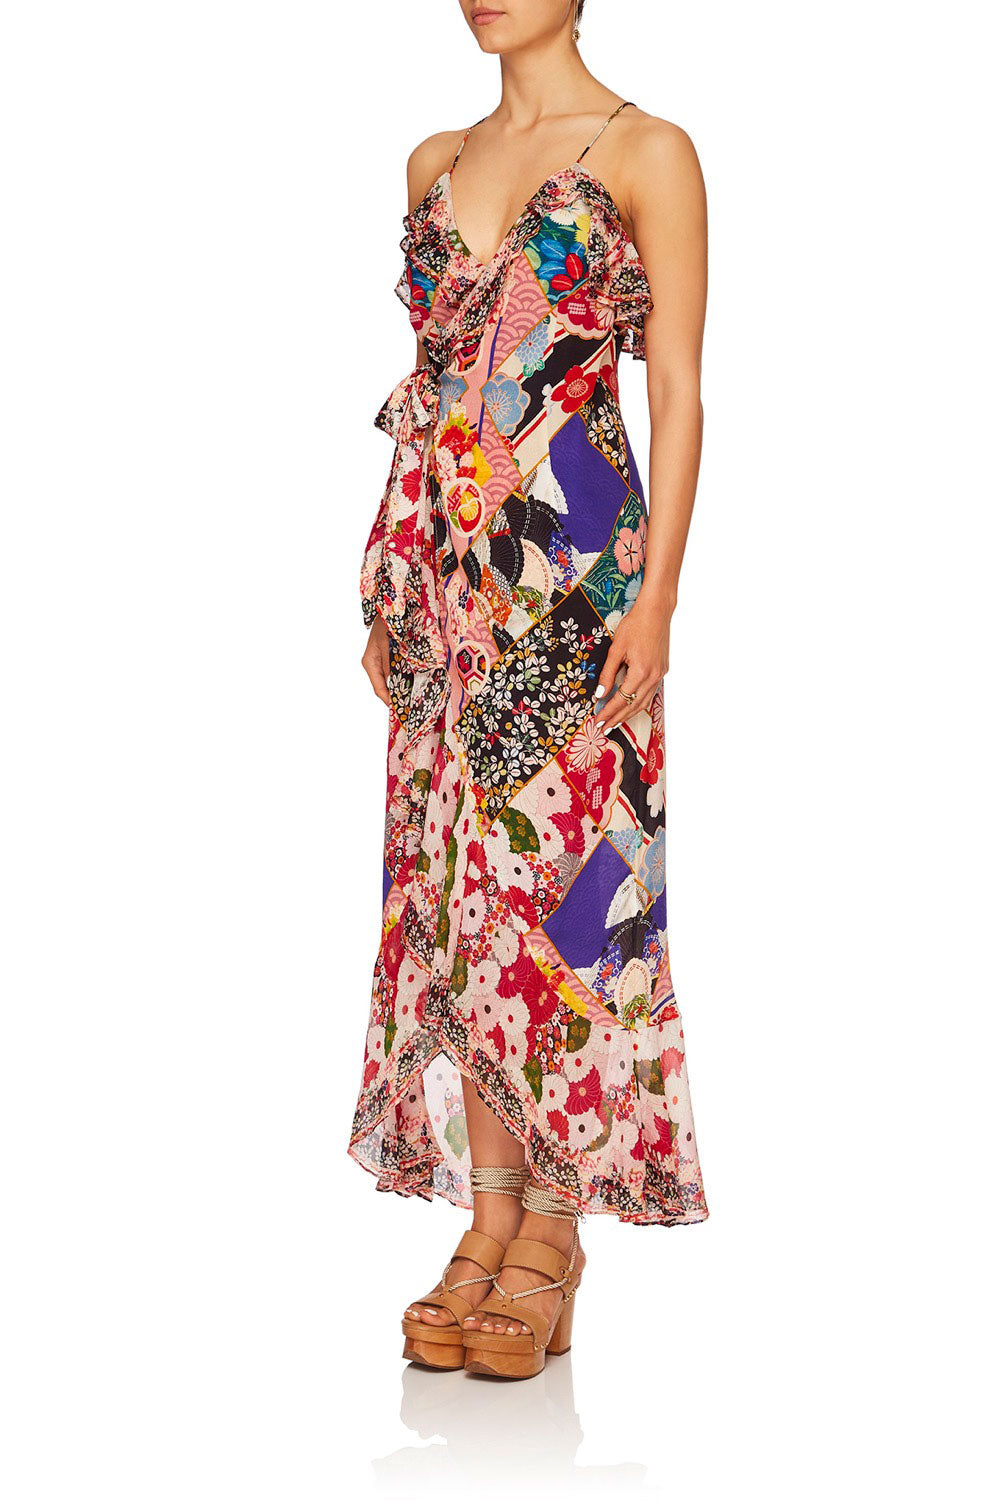 CAMILLA POSTCARDS FROM MARS LONG WRAP DRESS WFRILL